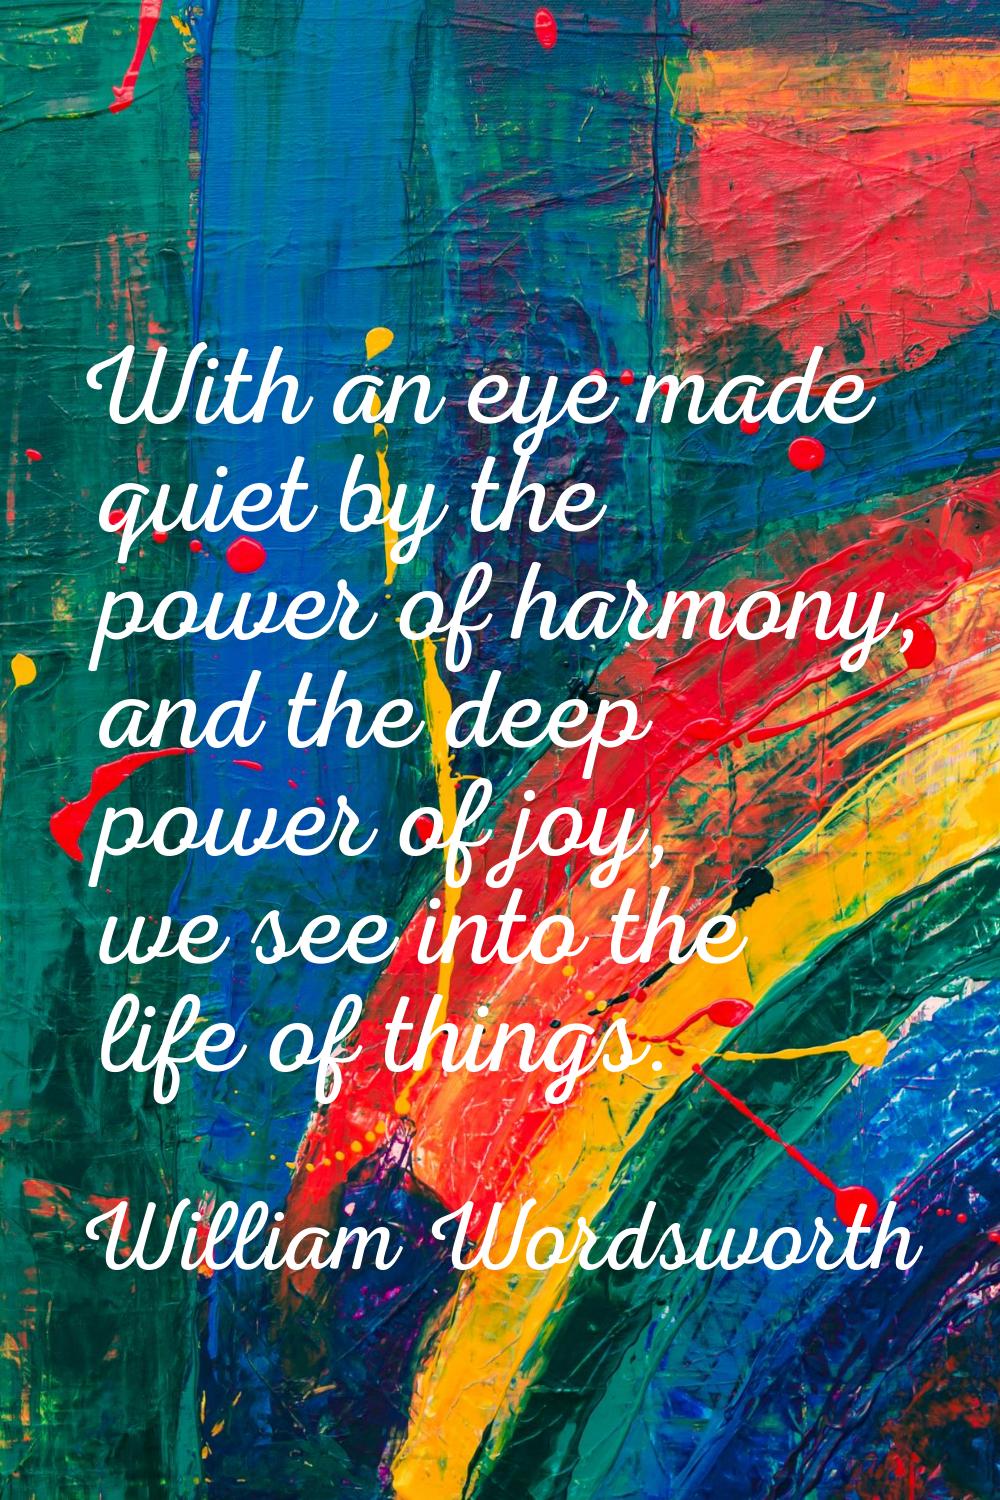 With an eye made quiet by the power of harmony, and the deep power of joy, we see into the life of 